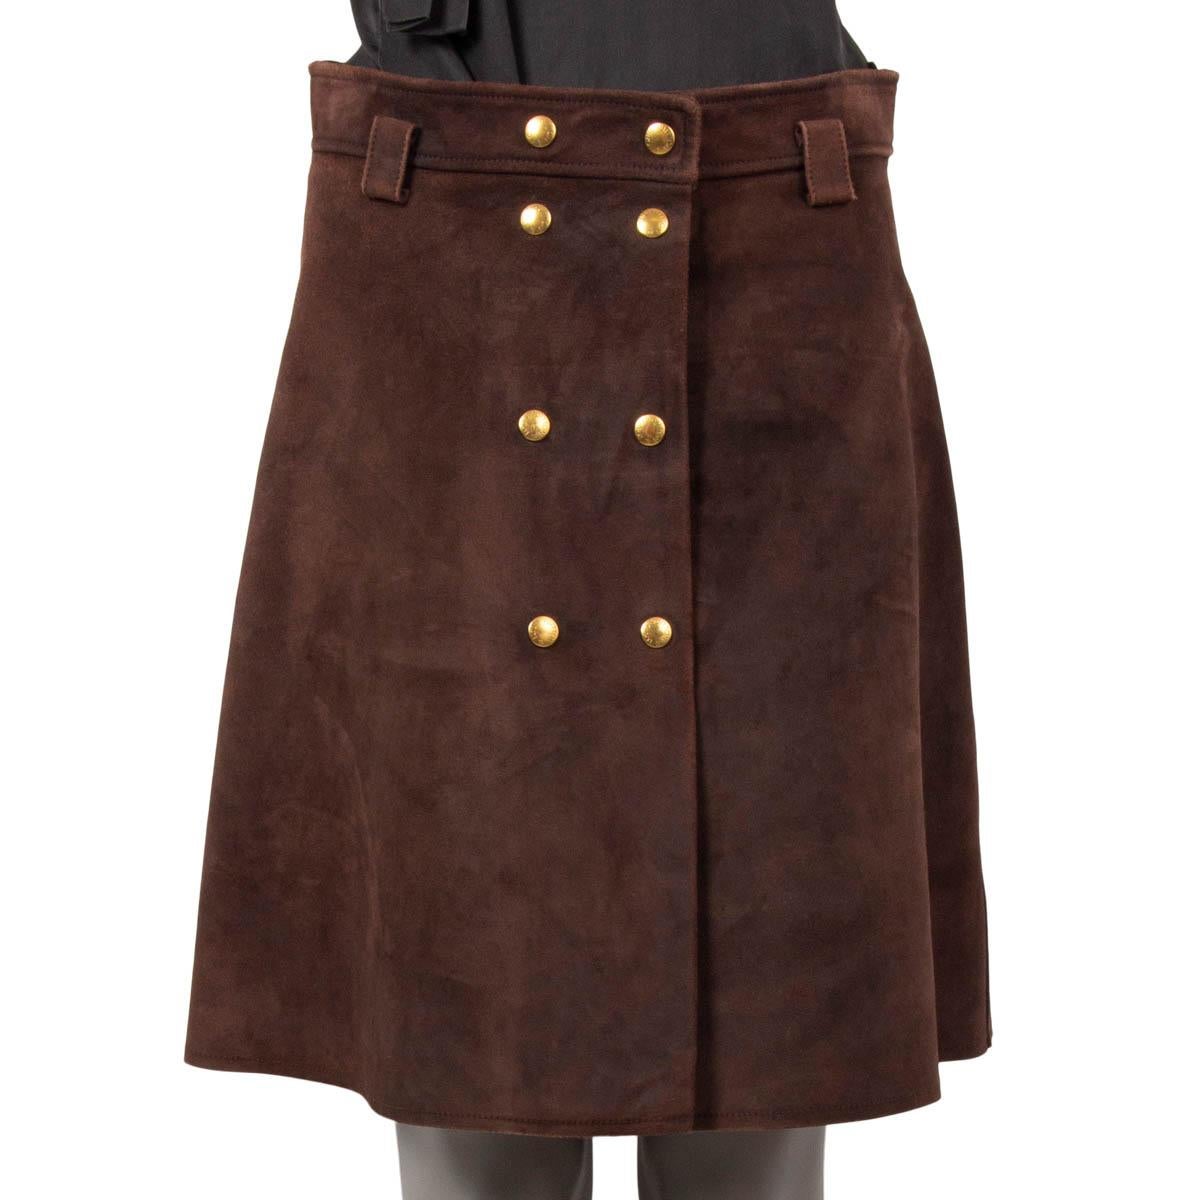 Black LOUIS VUITTON brown suede BUTTONED Skirt 40 M For Sale